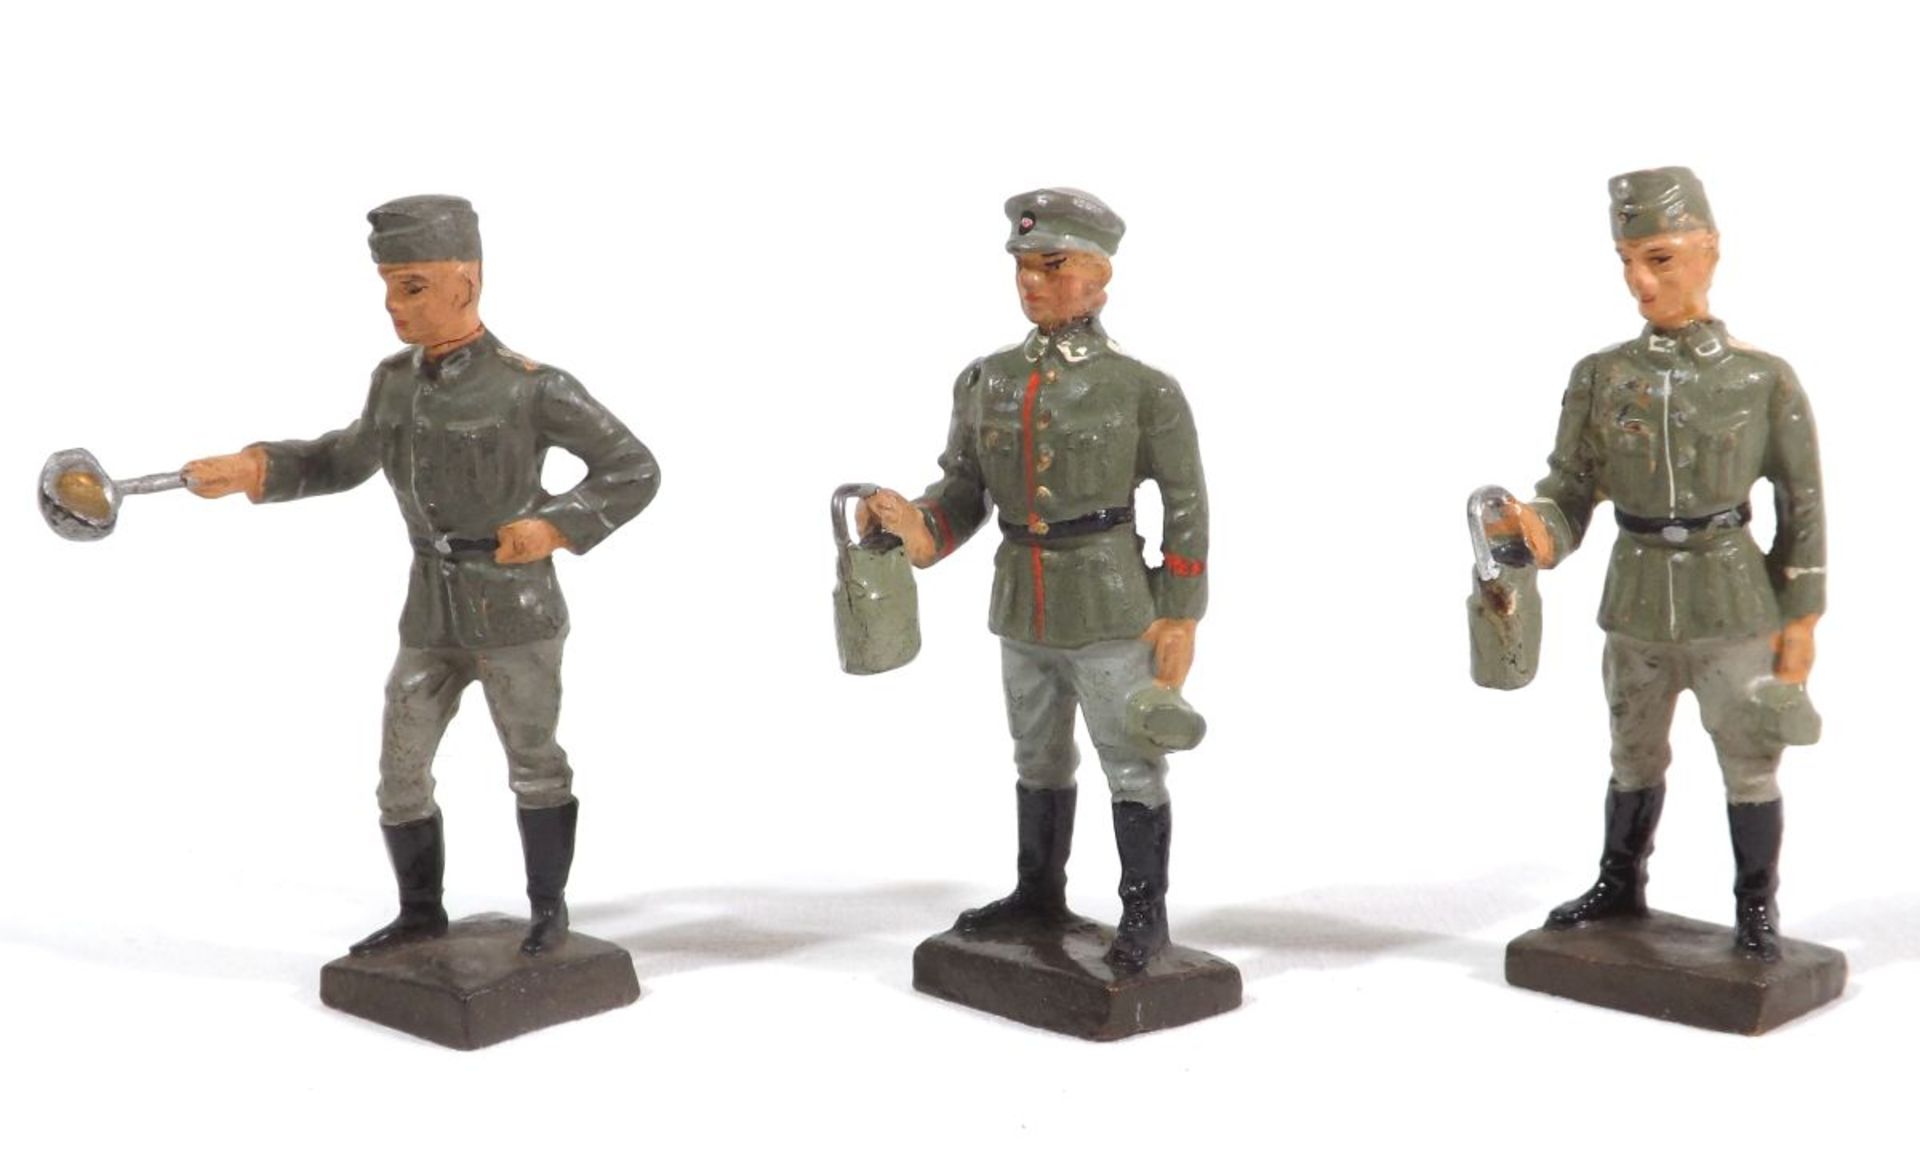 German military, Lineol, composition figures, 7-7,5 cm size, made in Germany about 1938